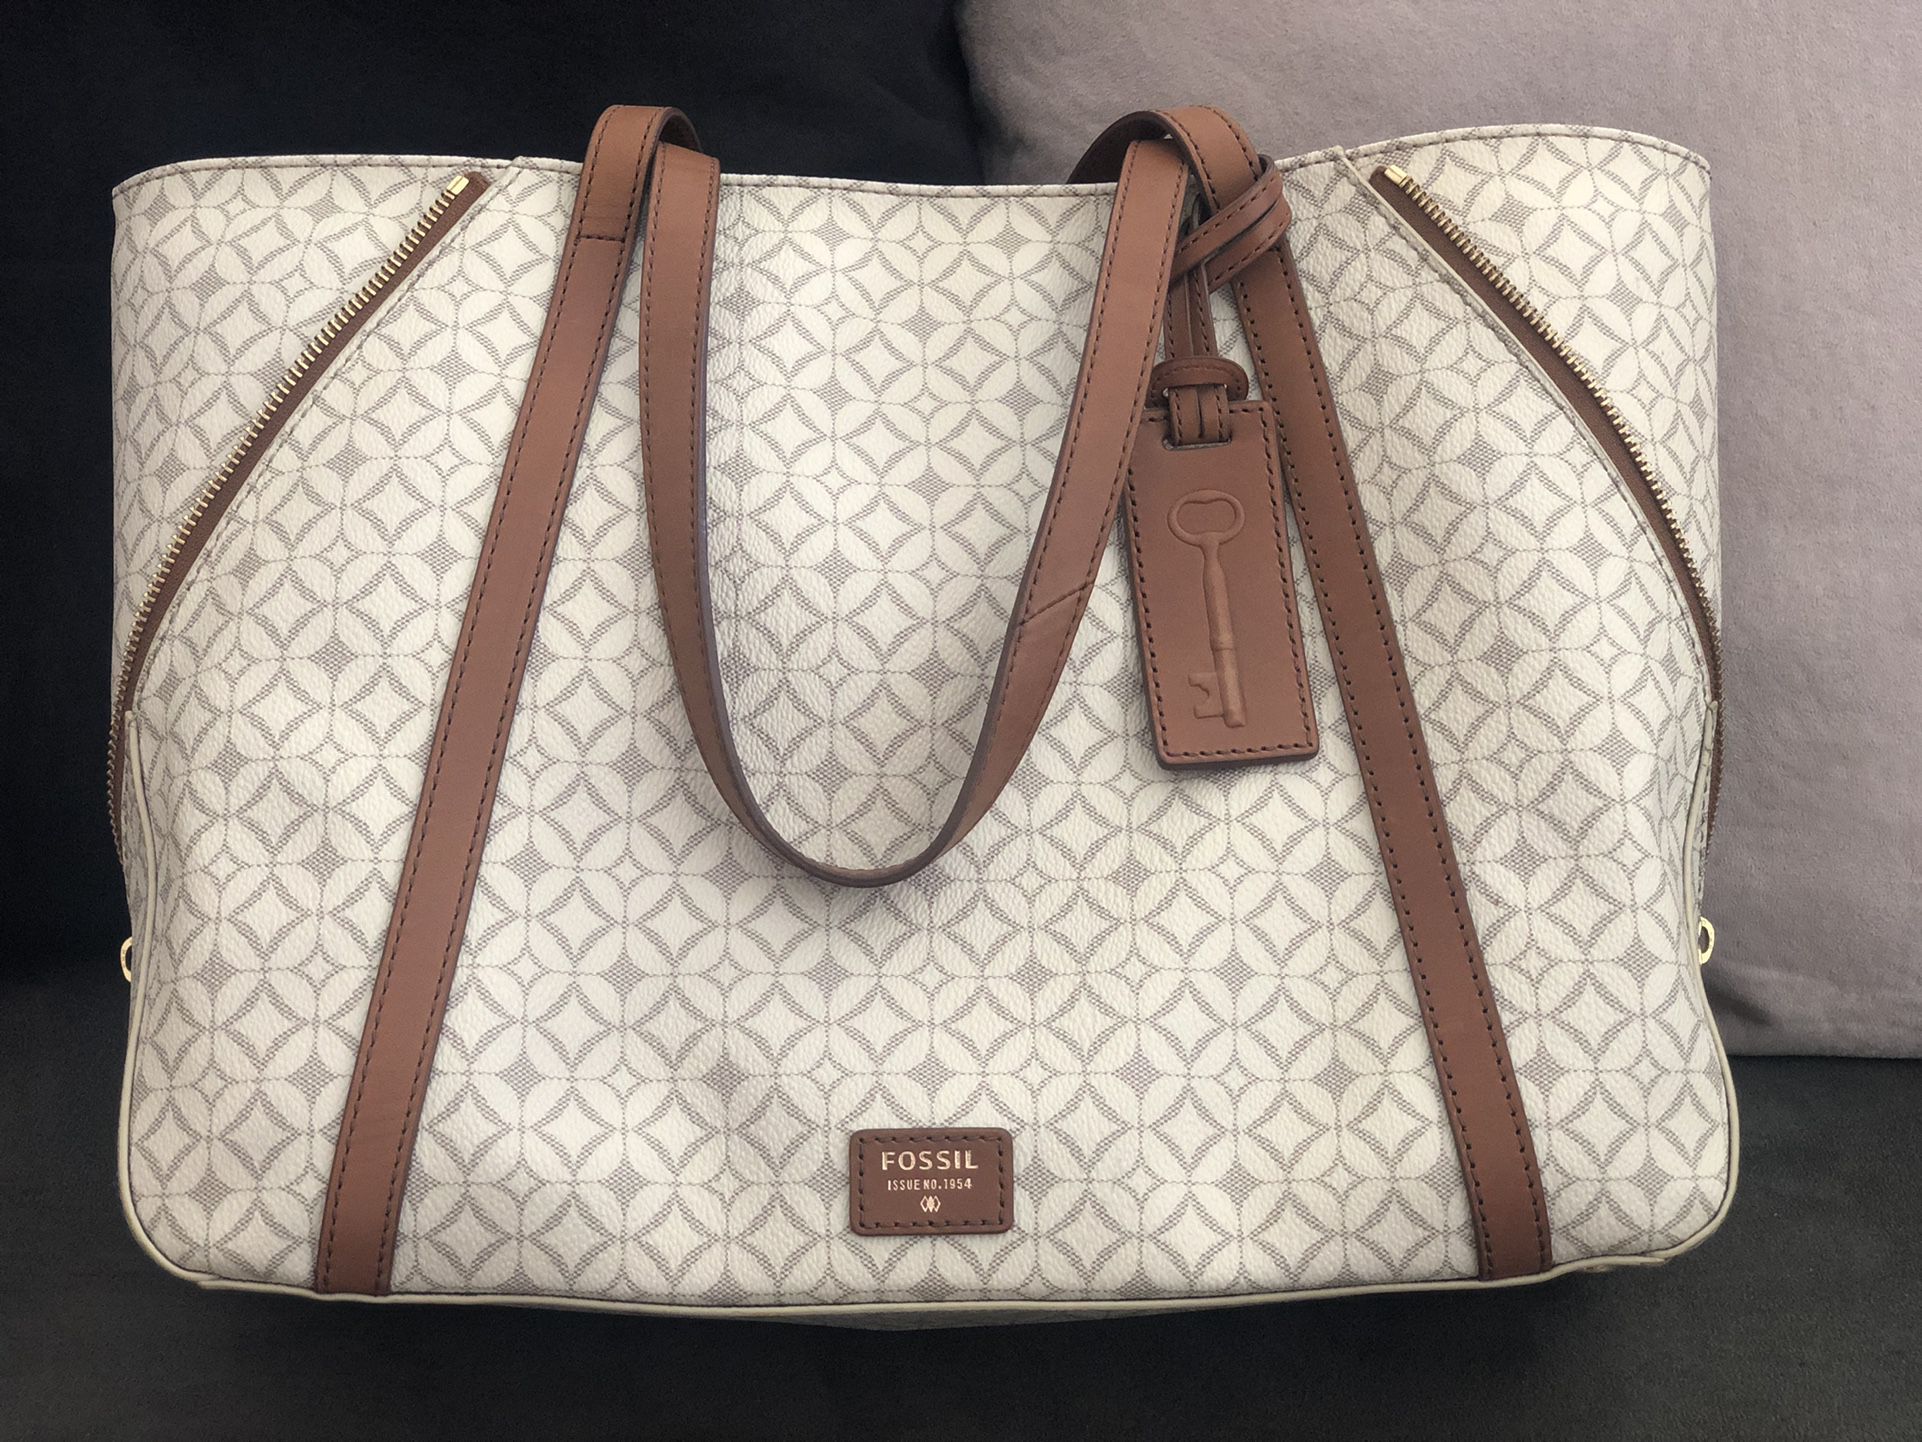 Fossil Tote Bag for Sale in Moreno Valley, CA - OfferUp